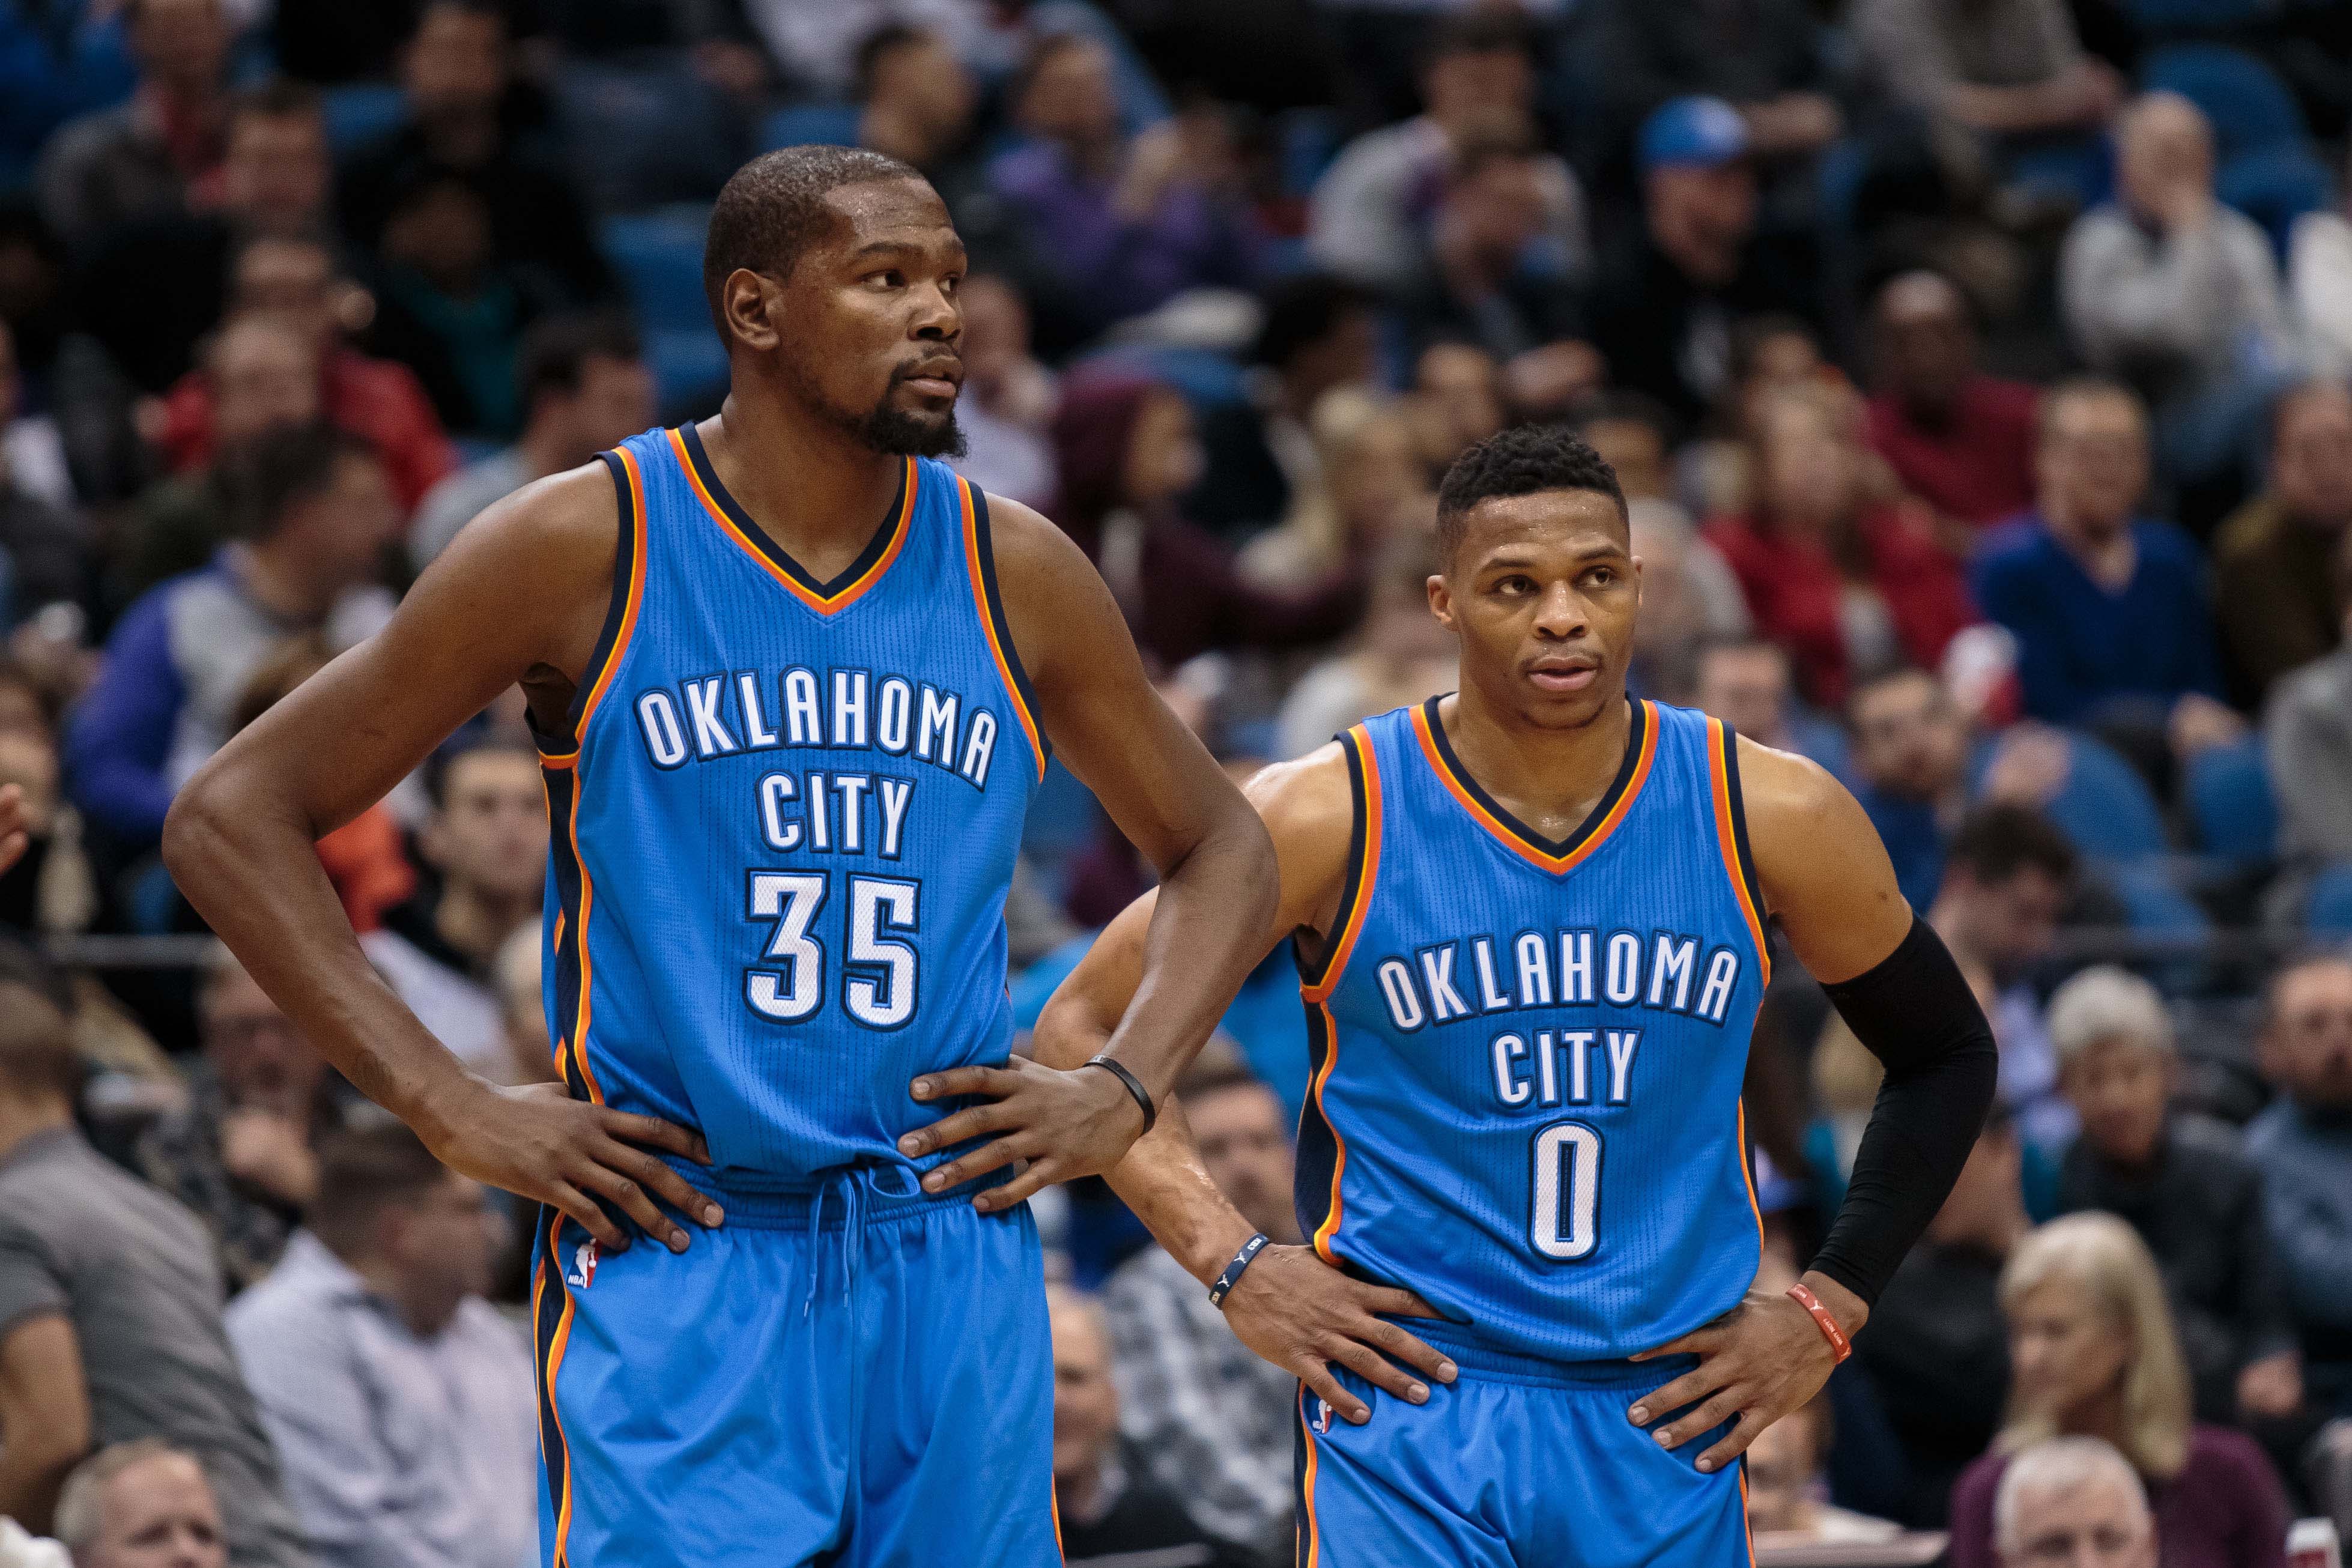 Russell Westbrook an MVP Candidate without Kevin Durant